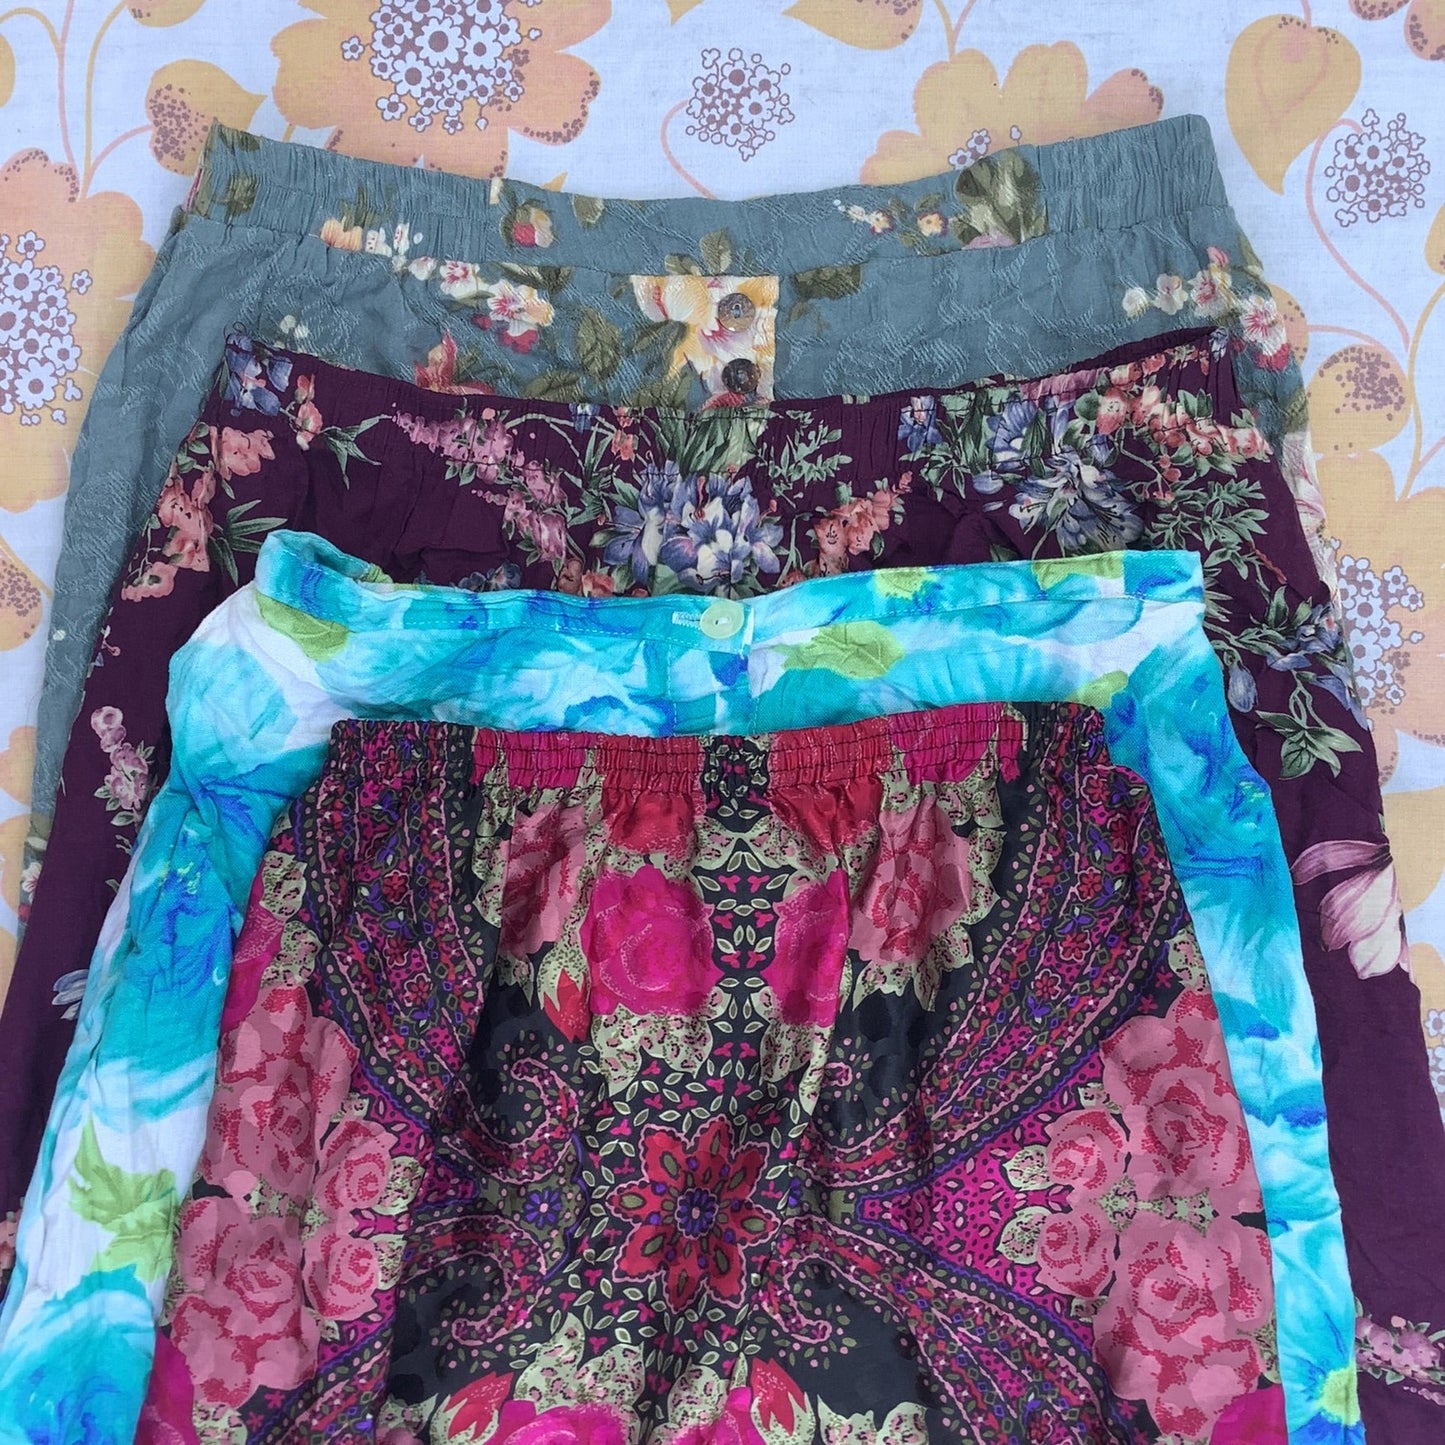 Wholesale vintage and secondhand mixed bundles of ladies skirts. Choose from Grade A, B or ungraded to bulk buy per kilo, piece or bale. Handpick available in Sussex warehouse of Brighton's biggest vintage retailer or shop at monthly kilo sale events.